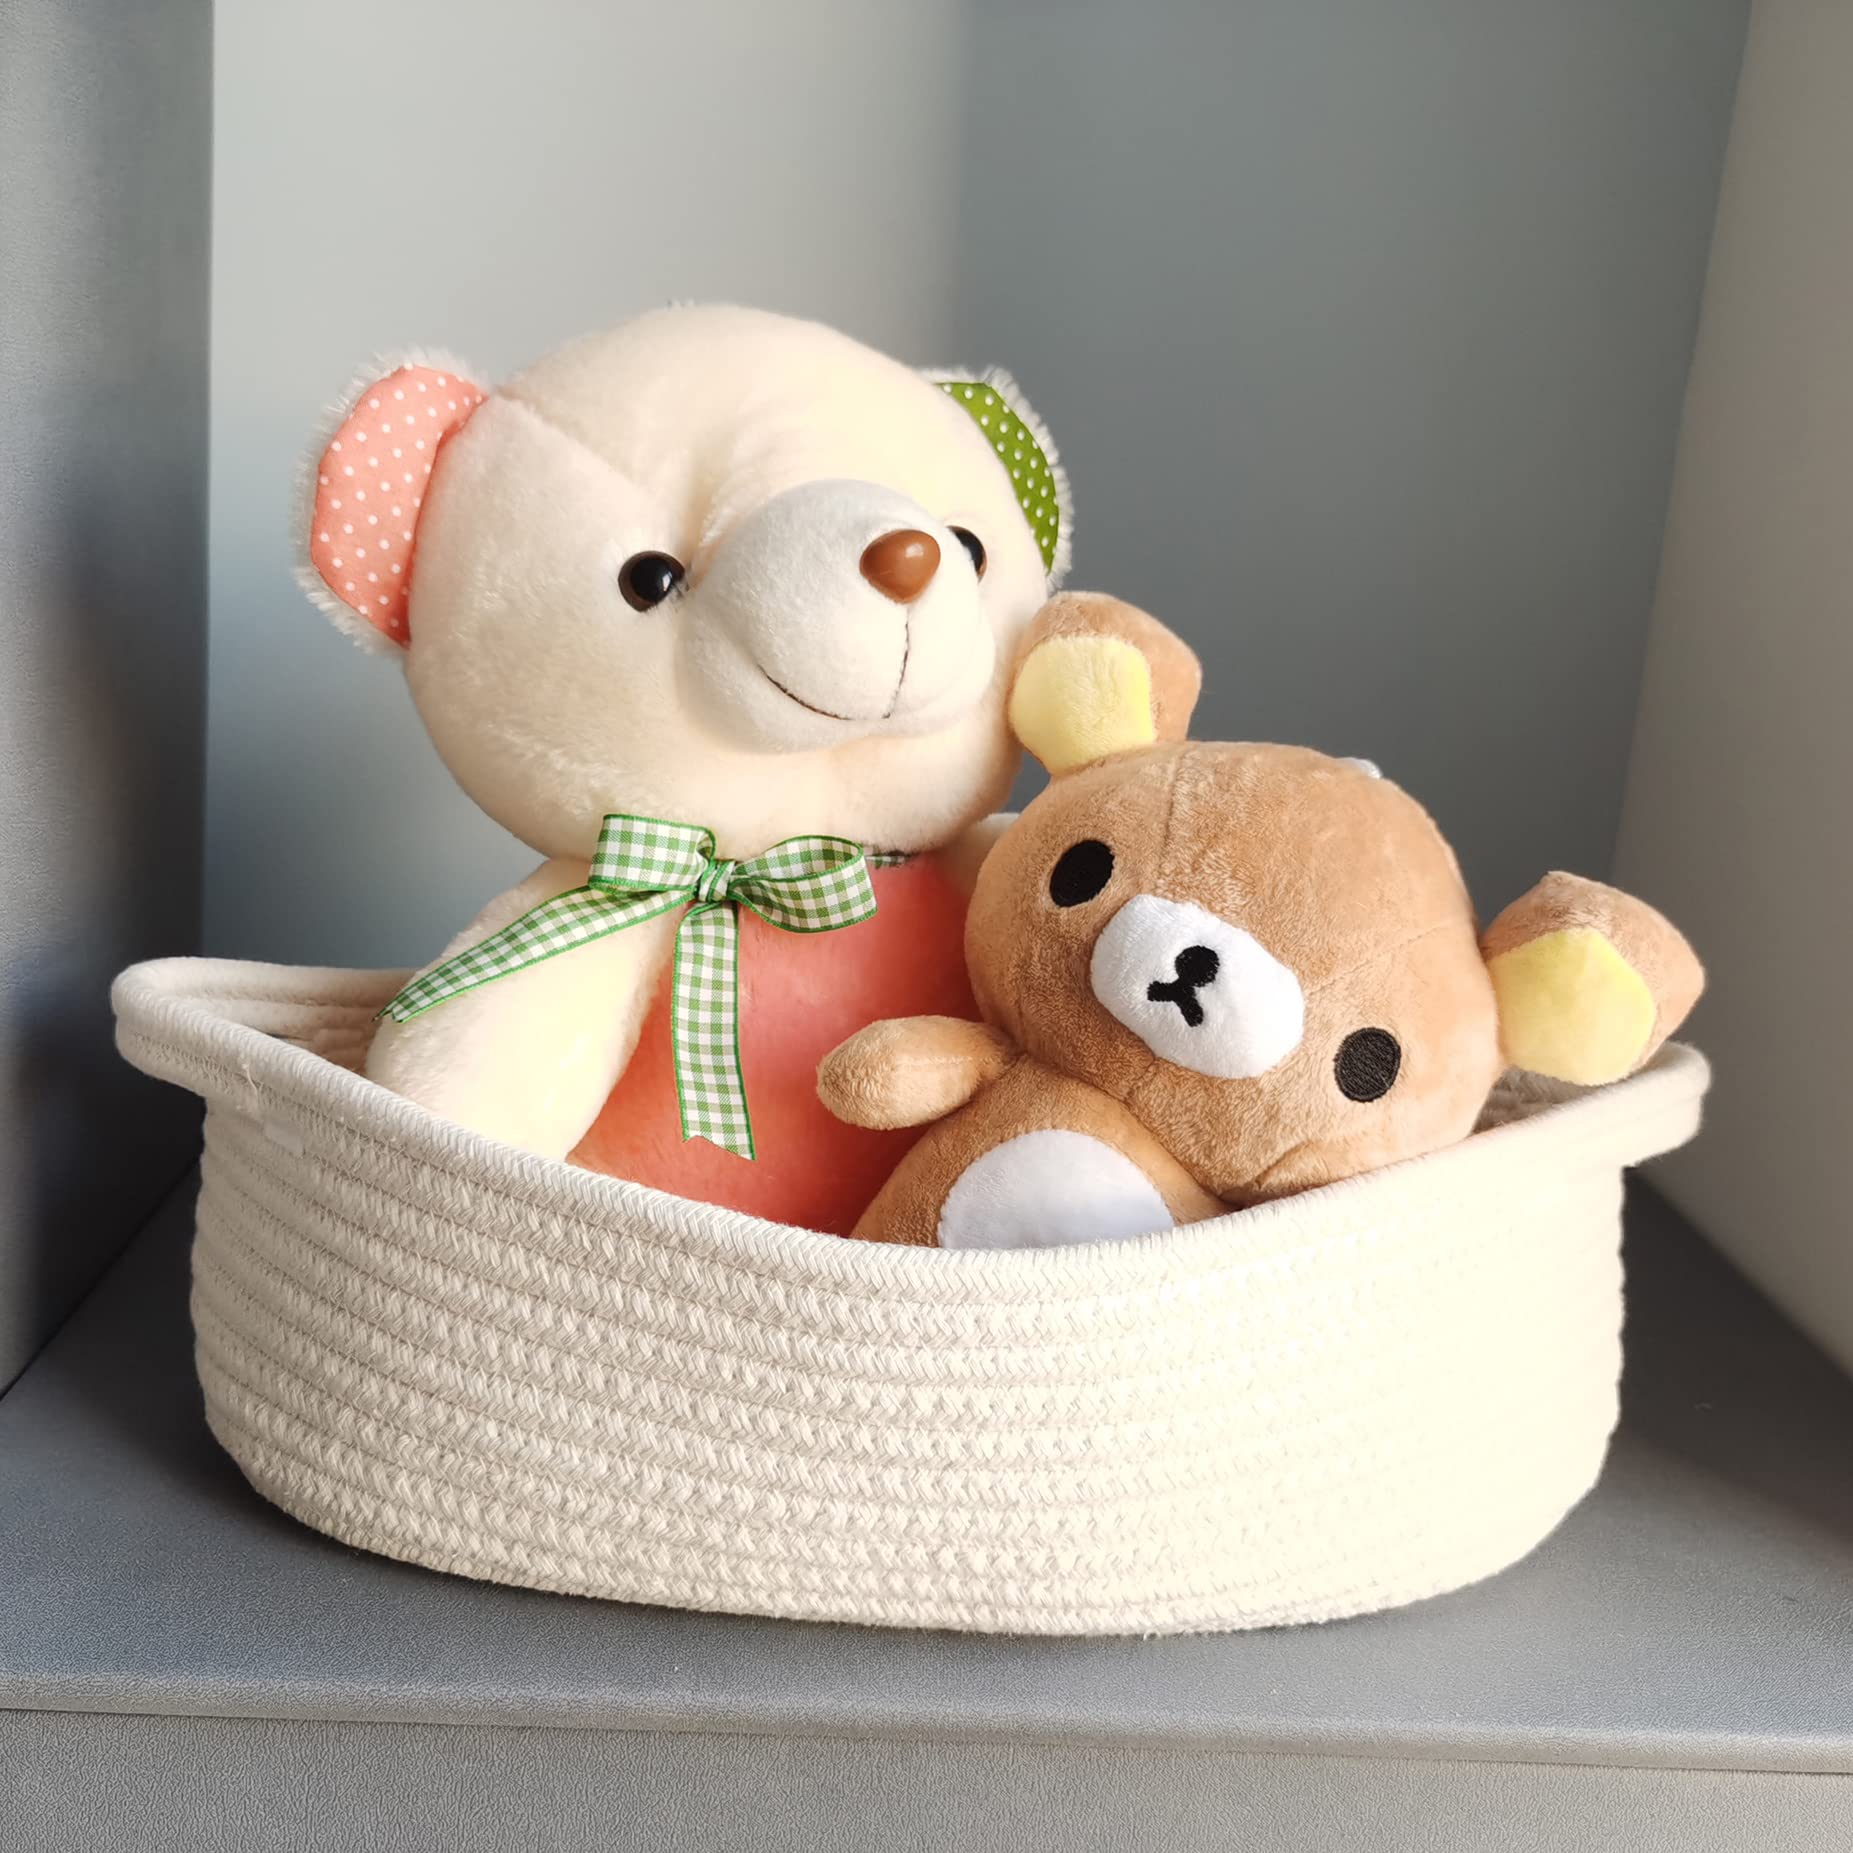 Woven Storage Basket Cotton Rope with Handle for Nursery Diaper, Blankets,Toys, Toliet Paper, Magazine and Keys, Cute Nursery Decor - 13"*7"*4"(White, 1)